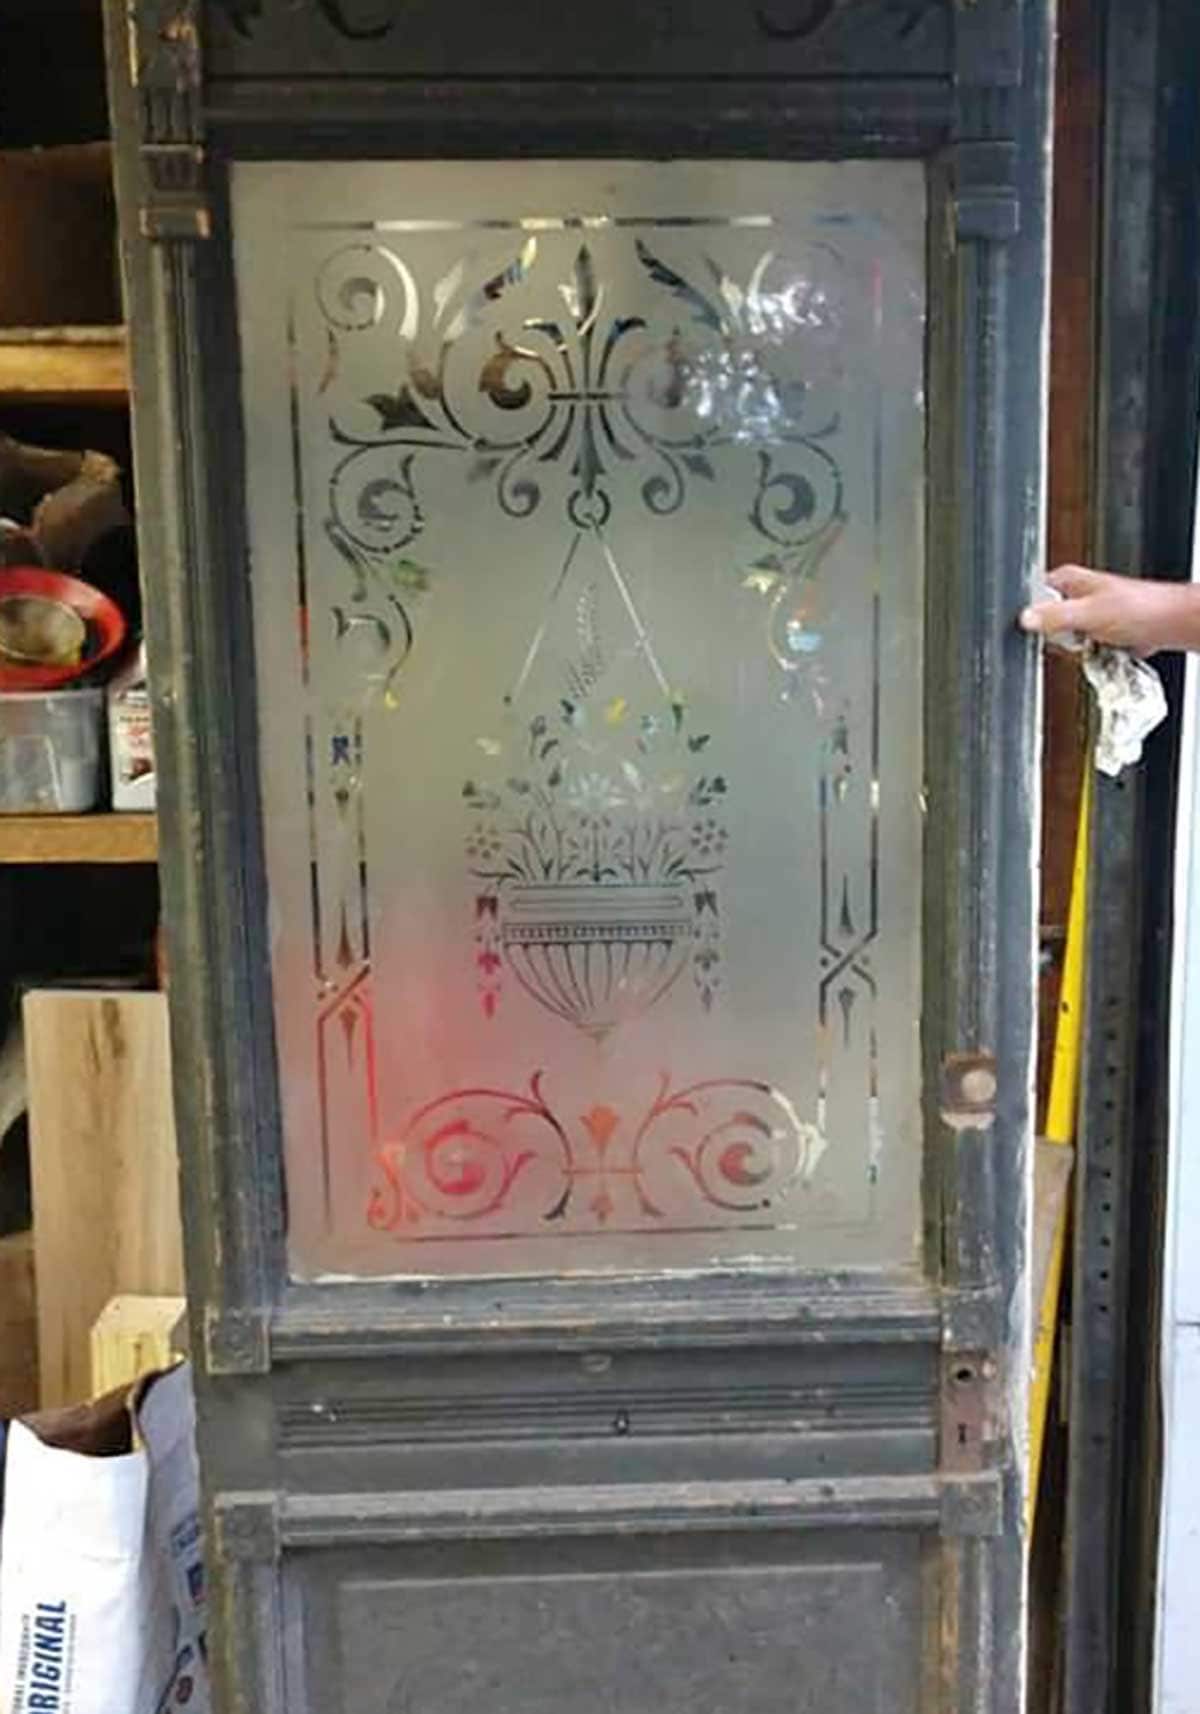 Modern Eclectic Kitchen Makeover And Renovation Renovation On A Budget - Antique Door On Facebook Marketplace